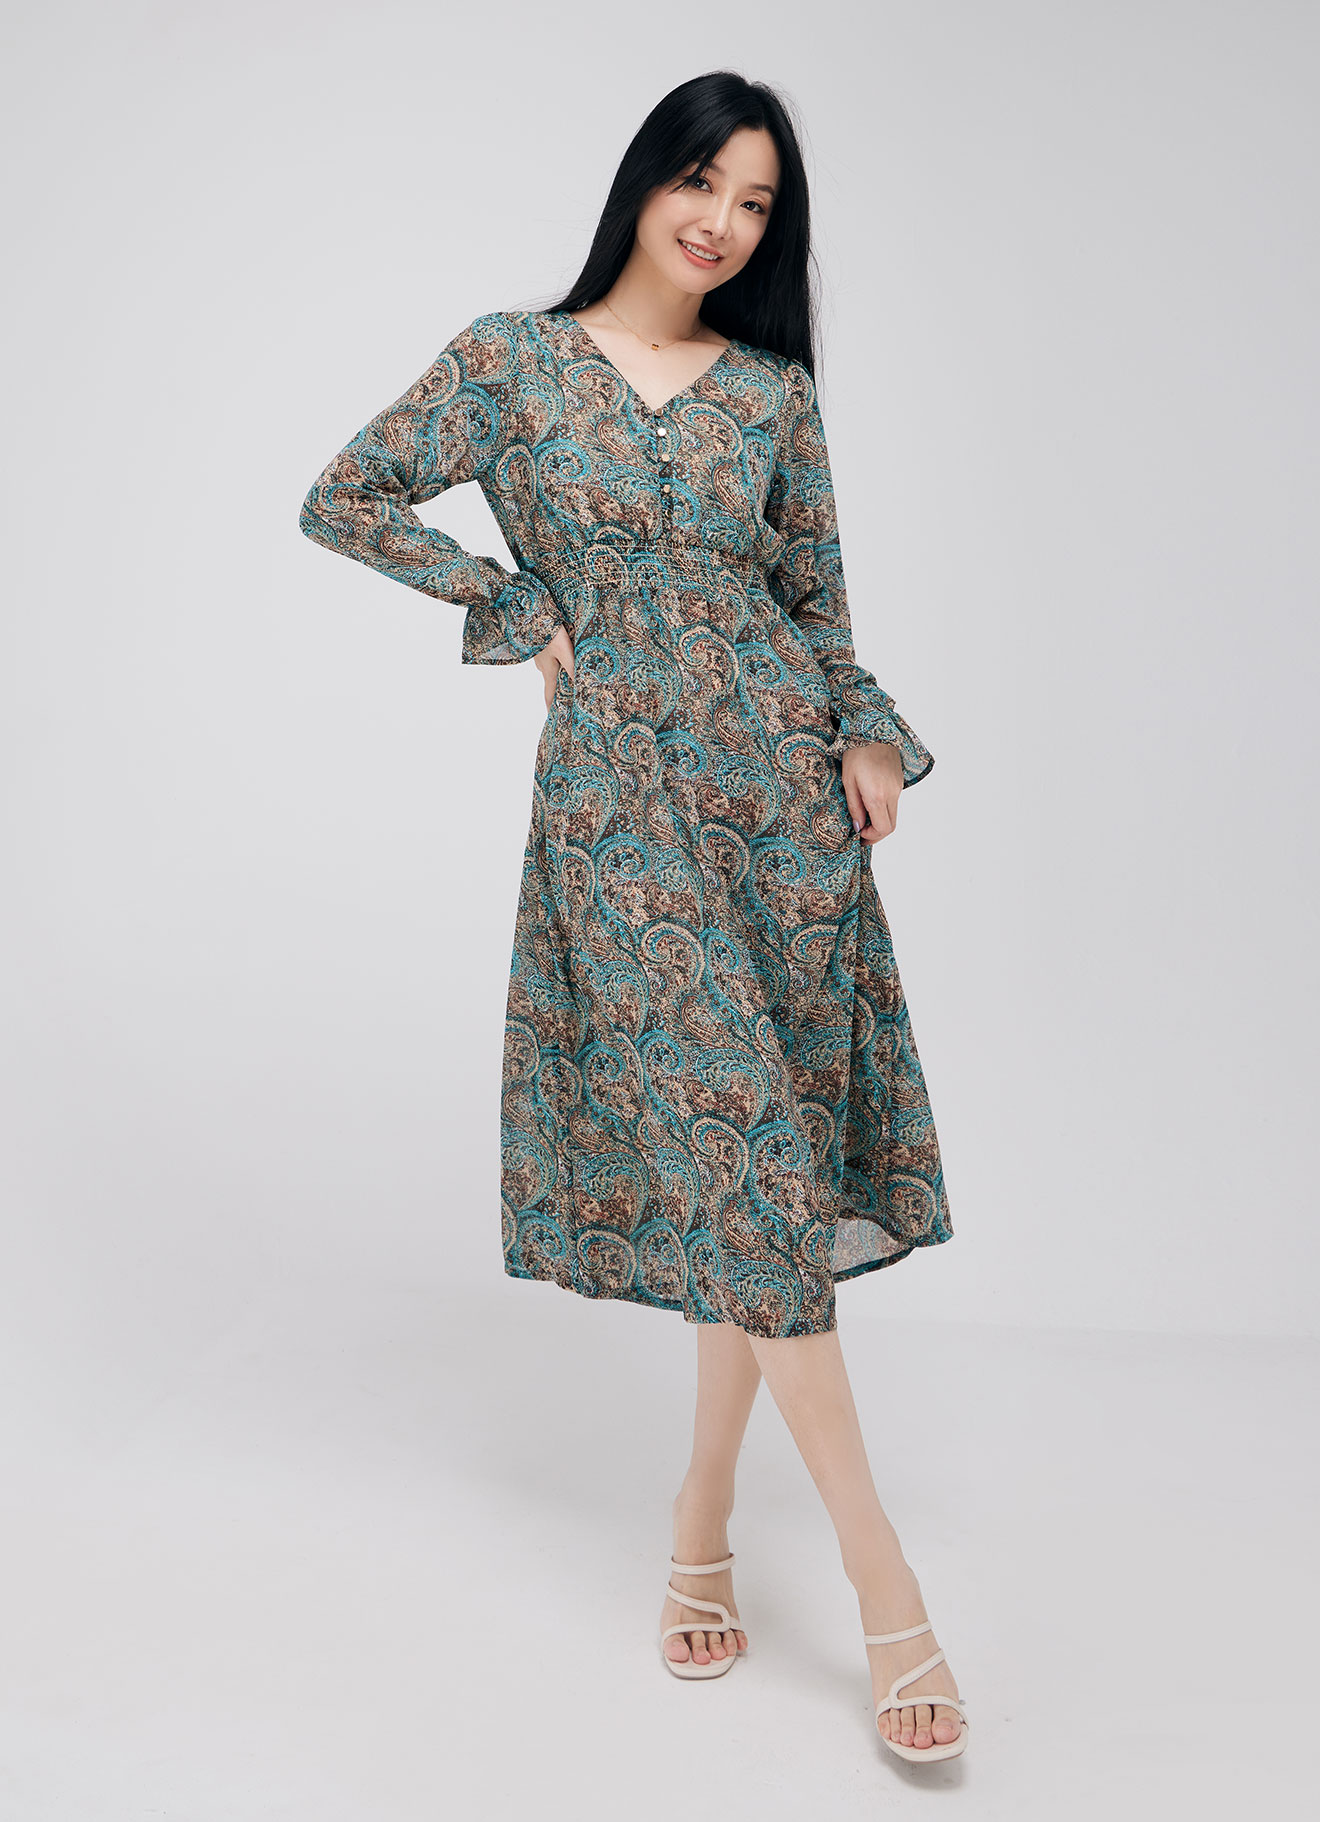 Blue-Radiance by Long Sleeve Dress